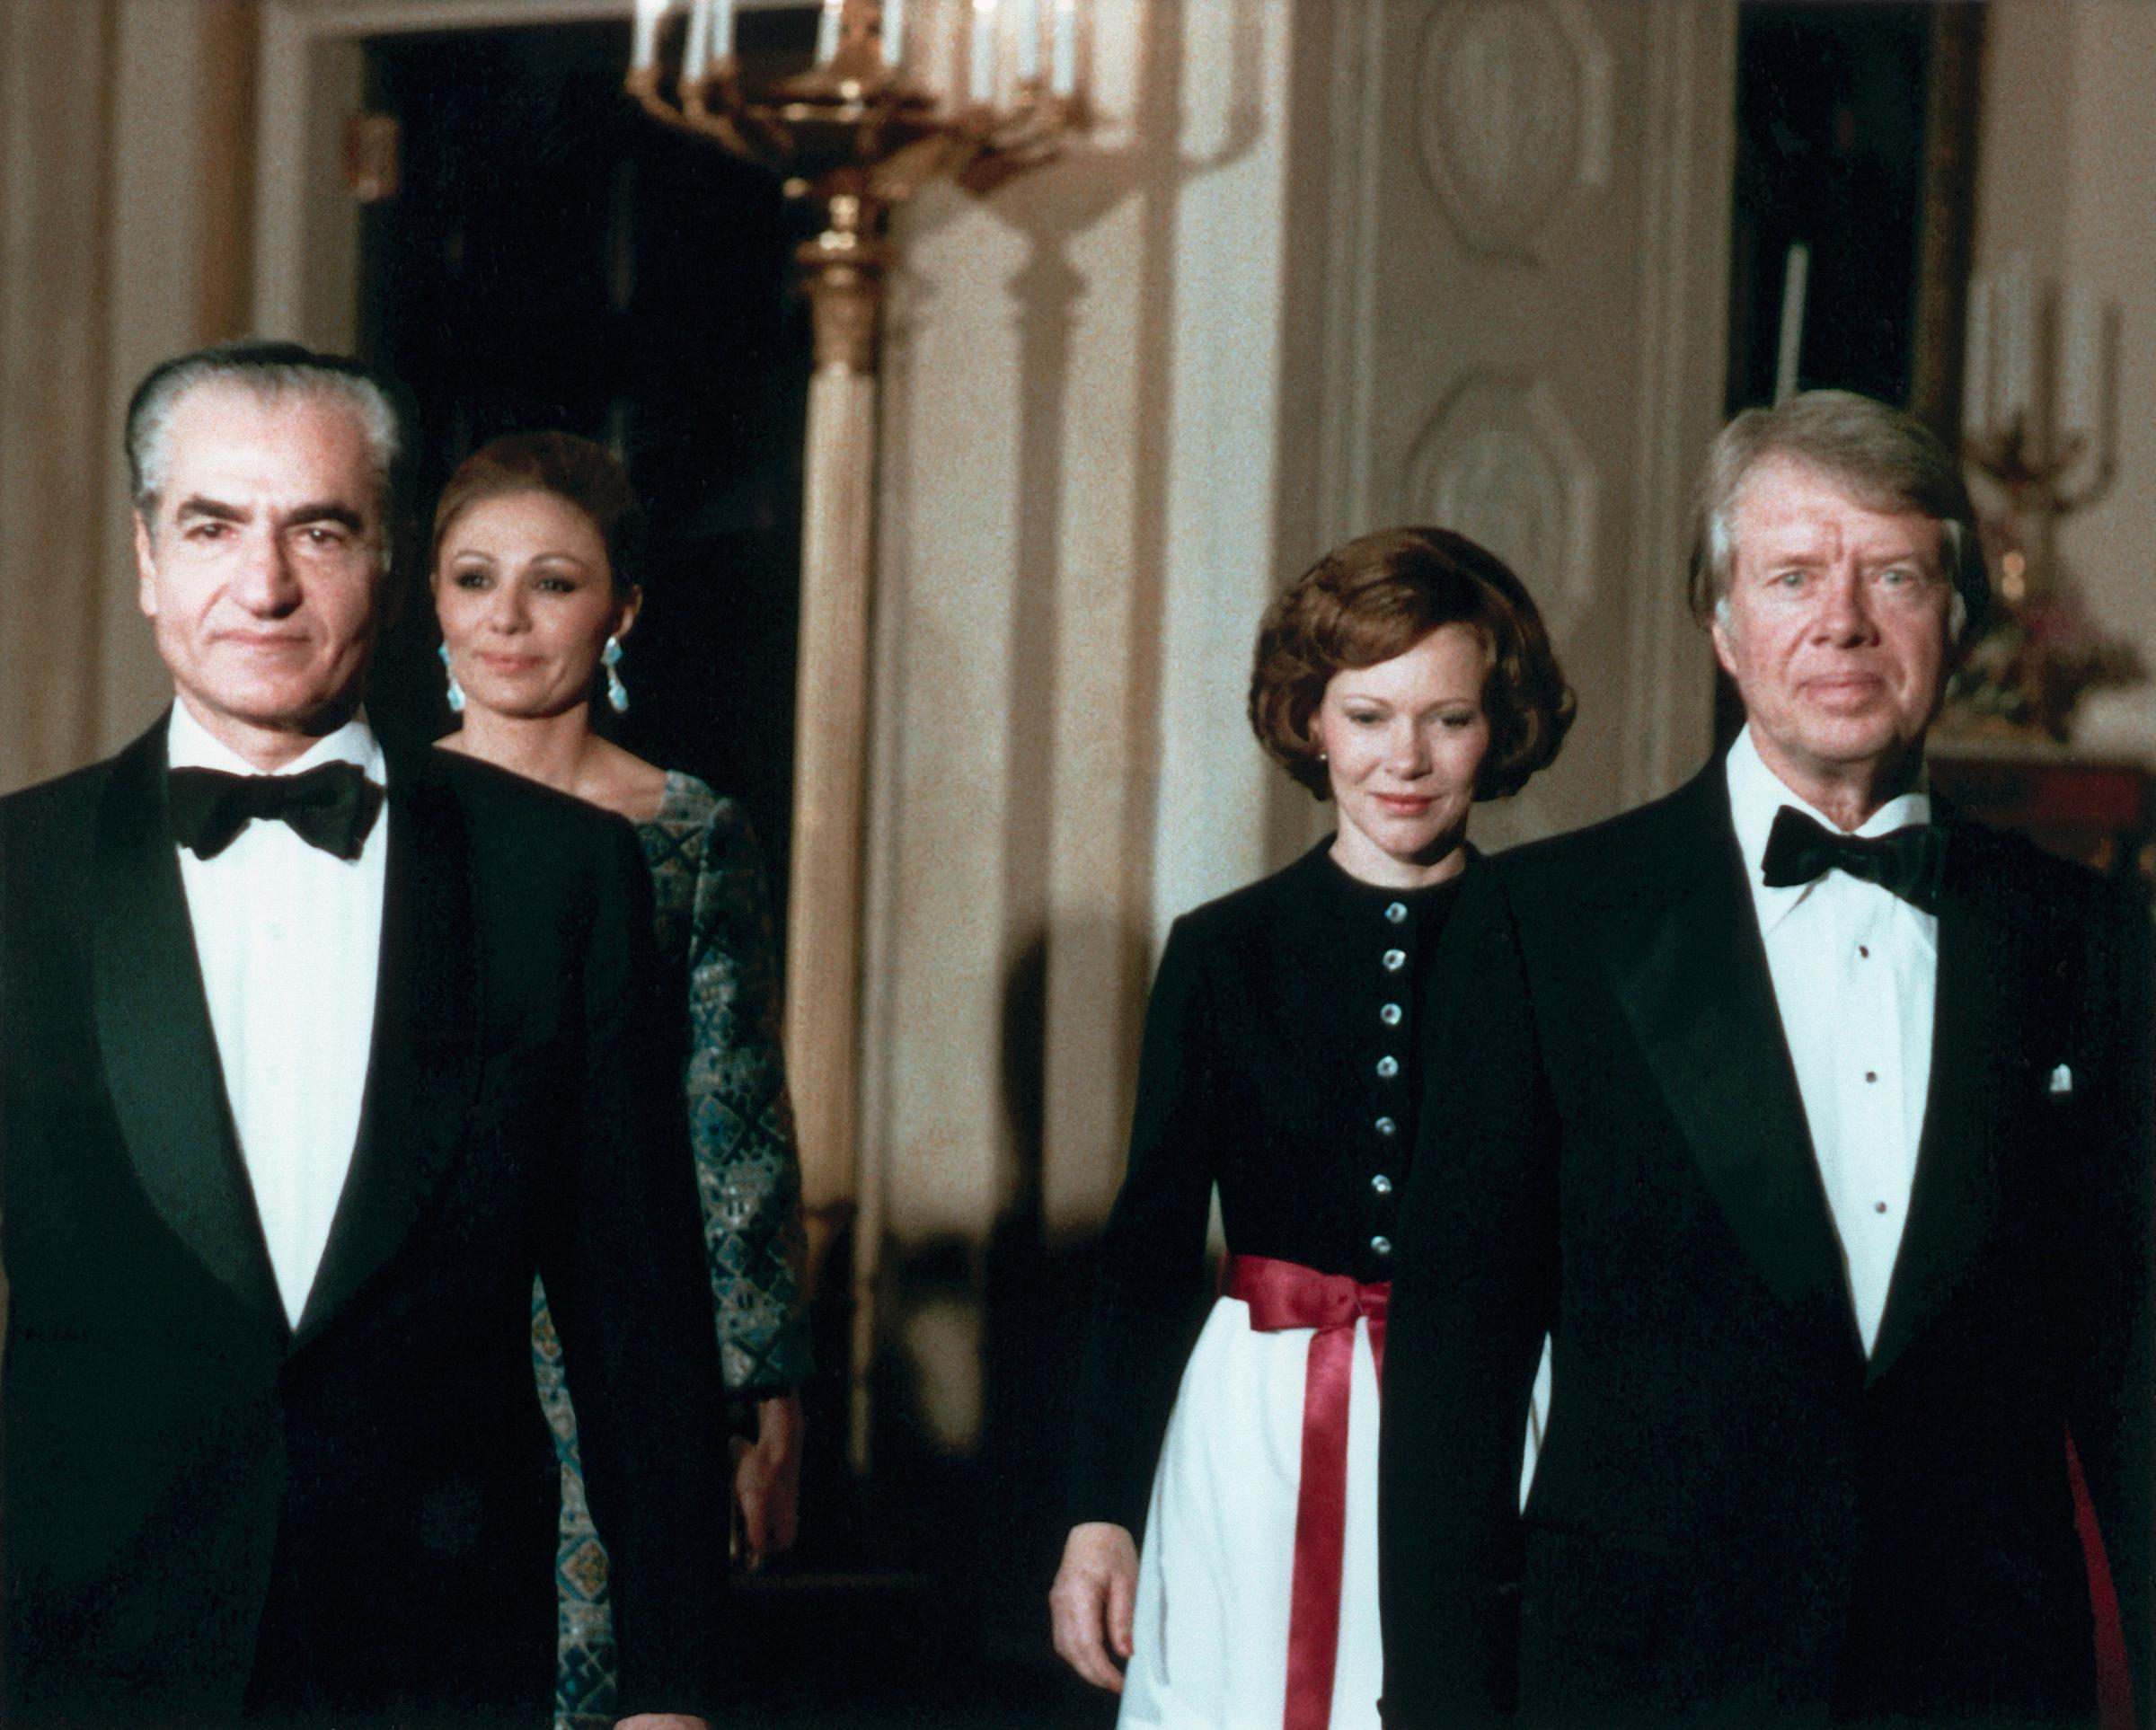 The Carters and the Royal Couple of Iran 1977